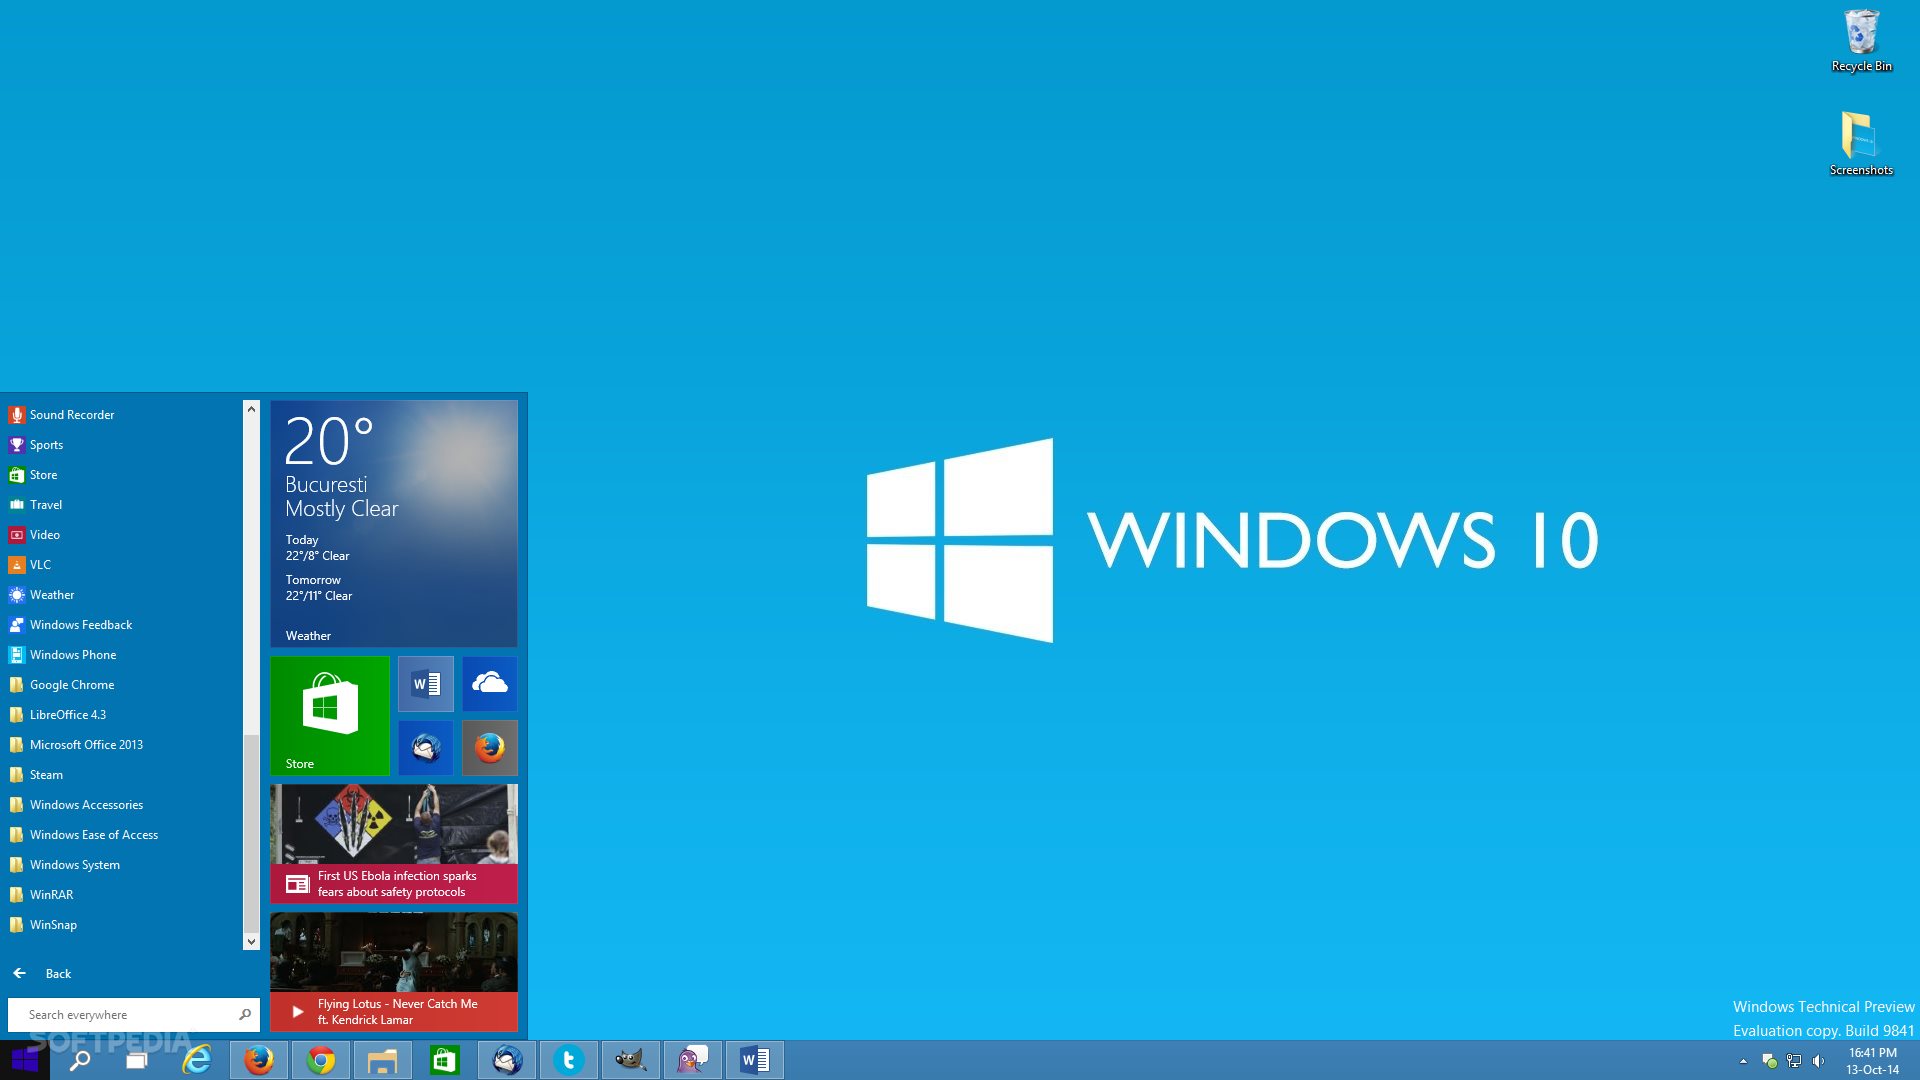 Windows 10 Consumer Preview References Spotted in Testing Builds